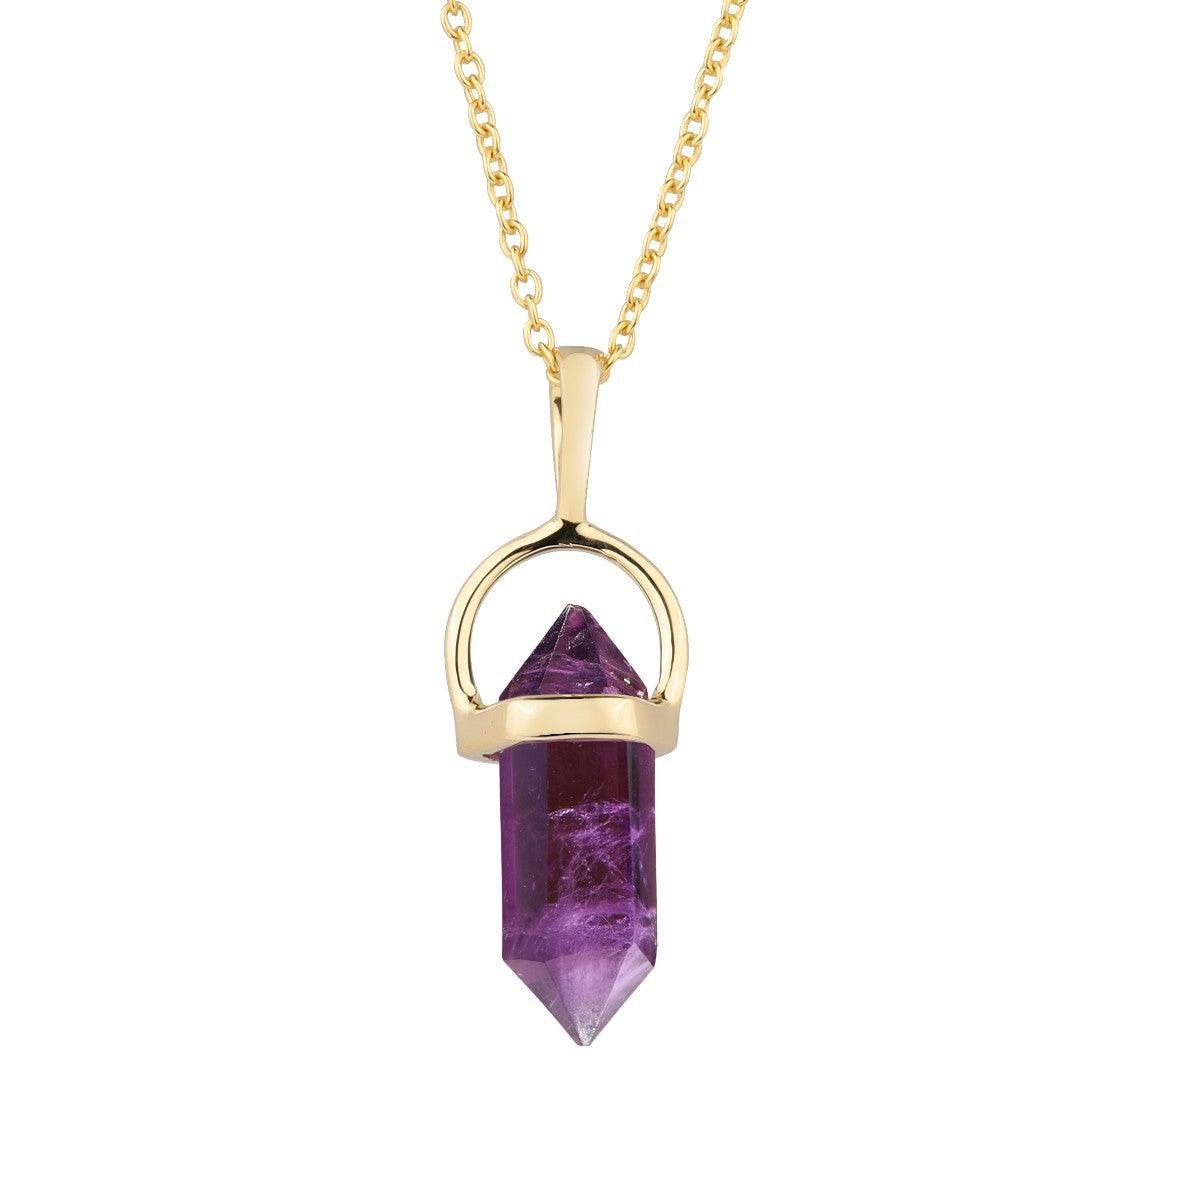 Amethyst Onyx Pencil Necklace 14kt Gold Over Silver Chain Pendant - YoTreasure